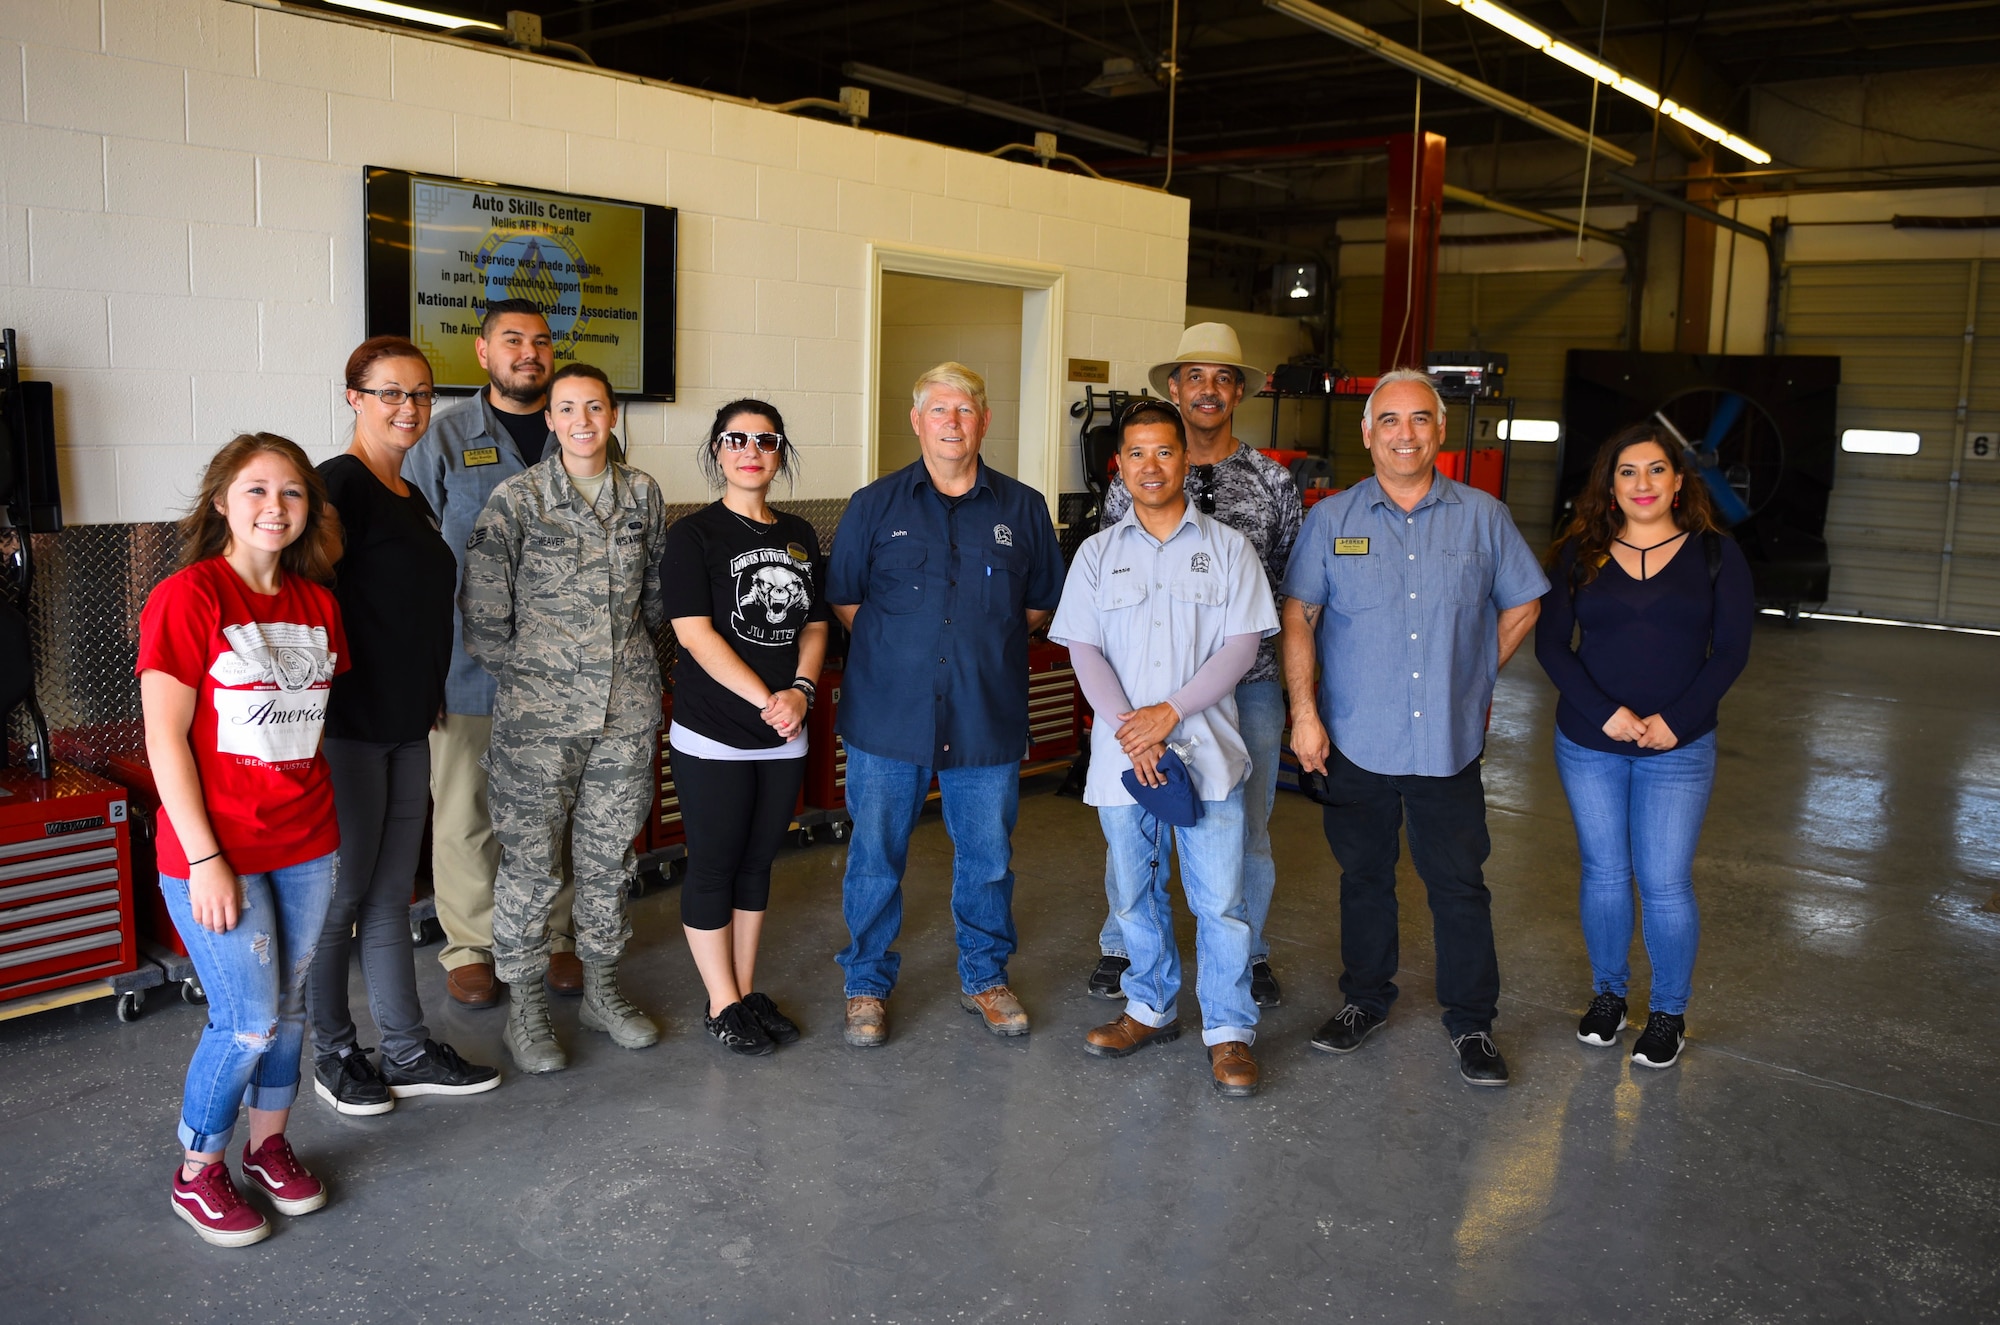 Members of the 99th Force Support Squadron celebrate the grand re-opening of the Auto Hobby Shop at Nellis Air Force Base, Nevada, May 31, 2018. The shop underwent major renovations to repair the facility as well as supply customers with the proper tools to perform maintenance on their vehicles. (U.S. Air Force photo by Airman 1st Class Andrew D. Sarver)